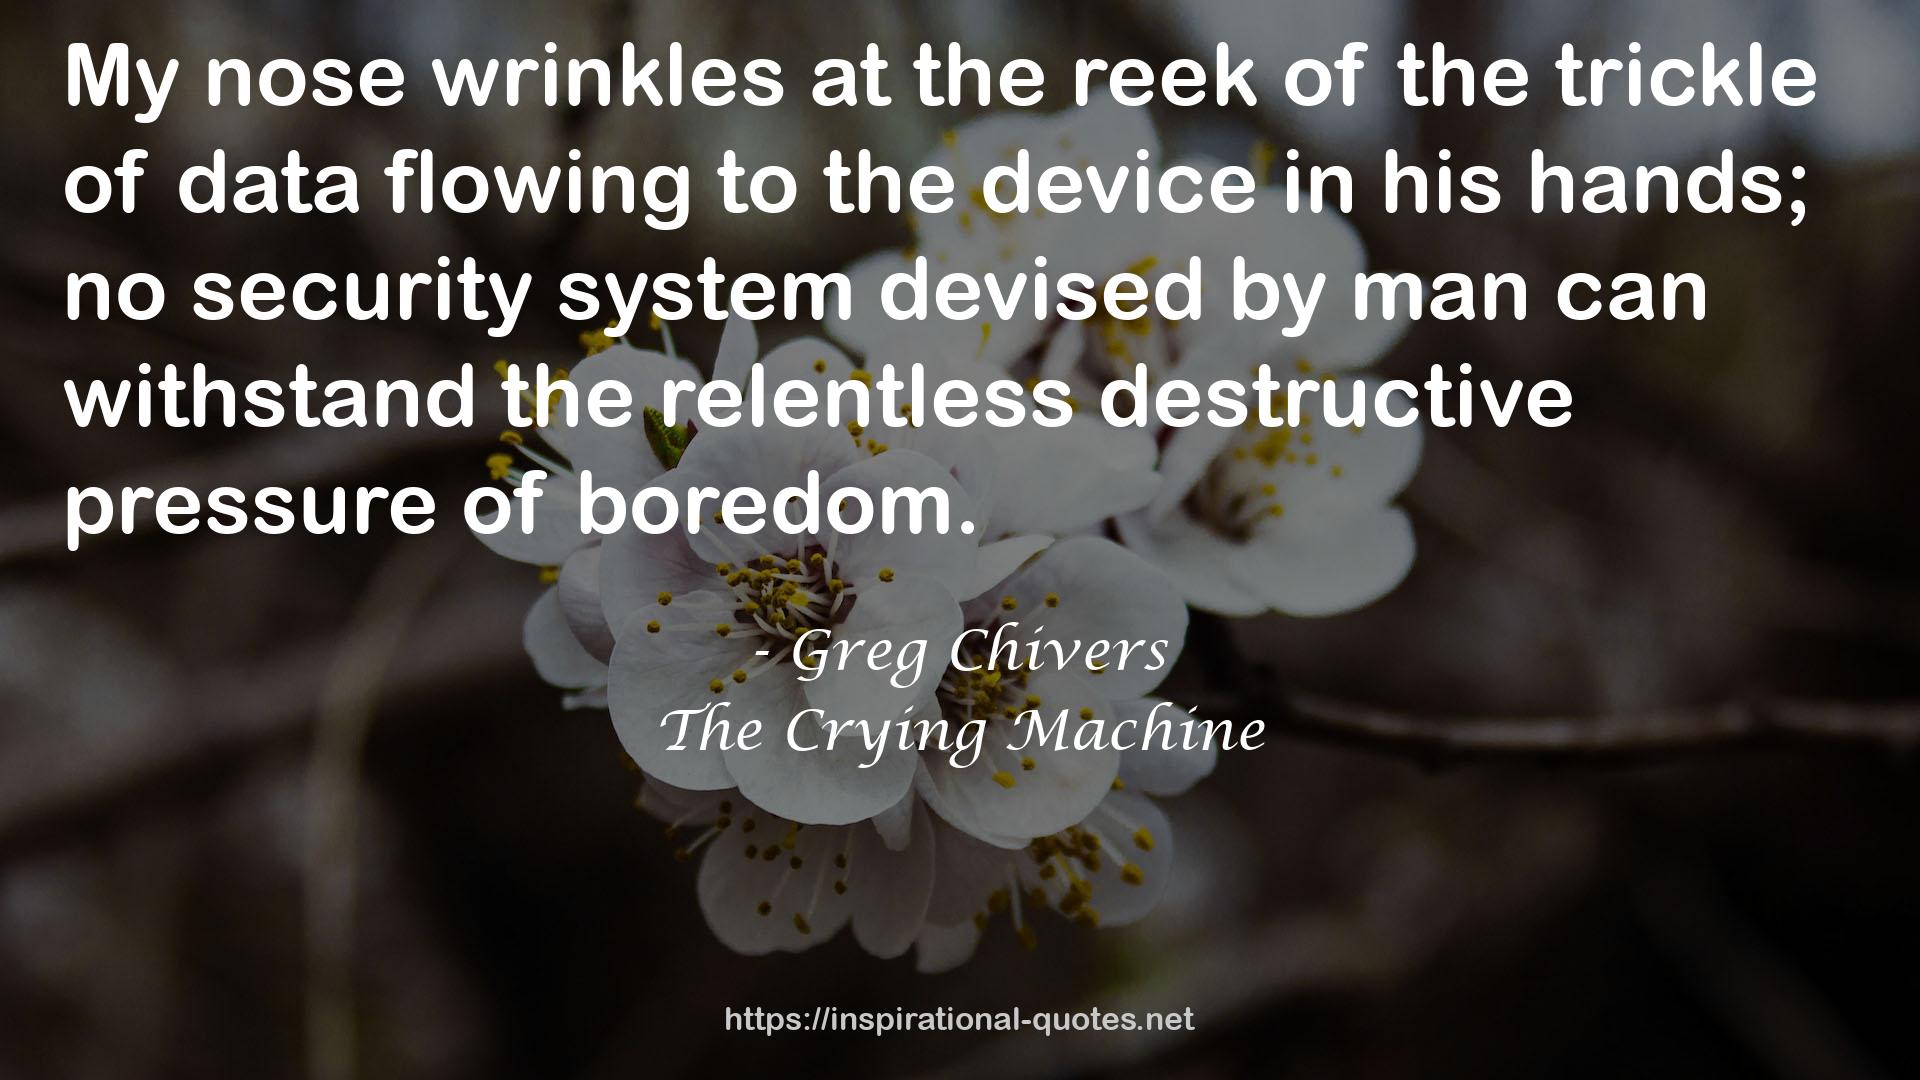 Greg Chivers QUOTES